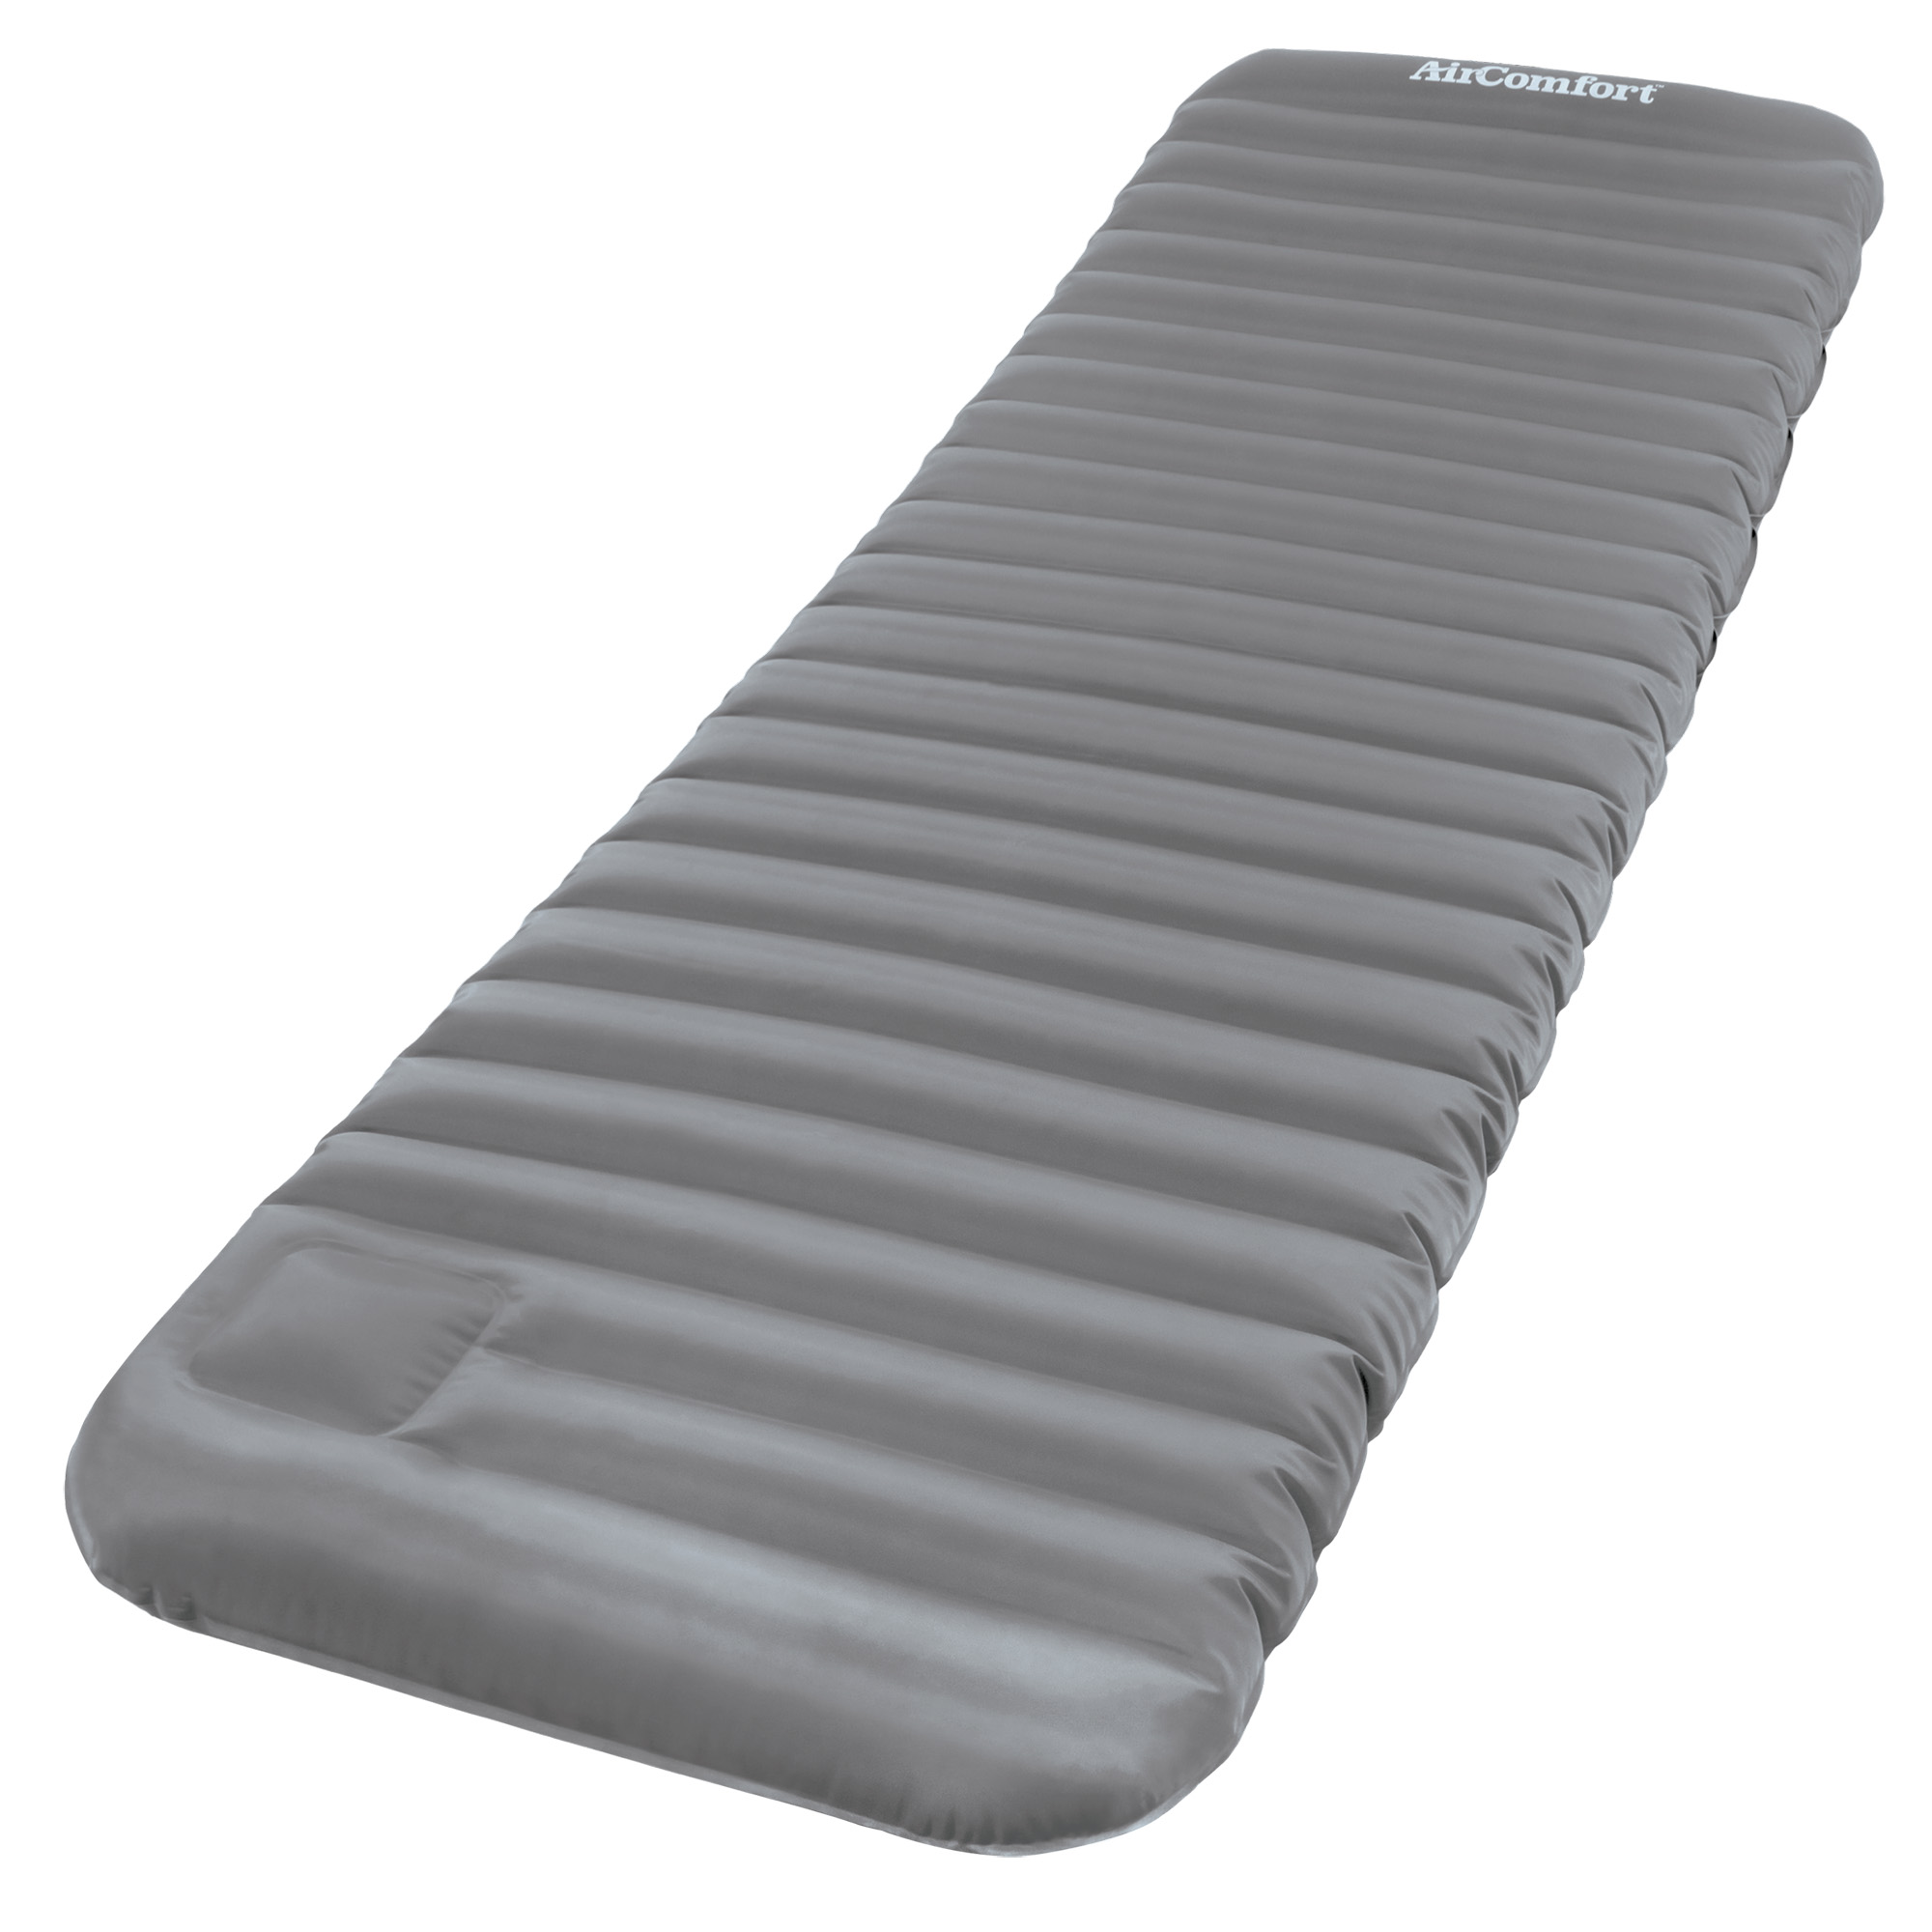 Air Comfort Roll & Go Inflatable Sleeping Pad   Large (Grey)   Fitness